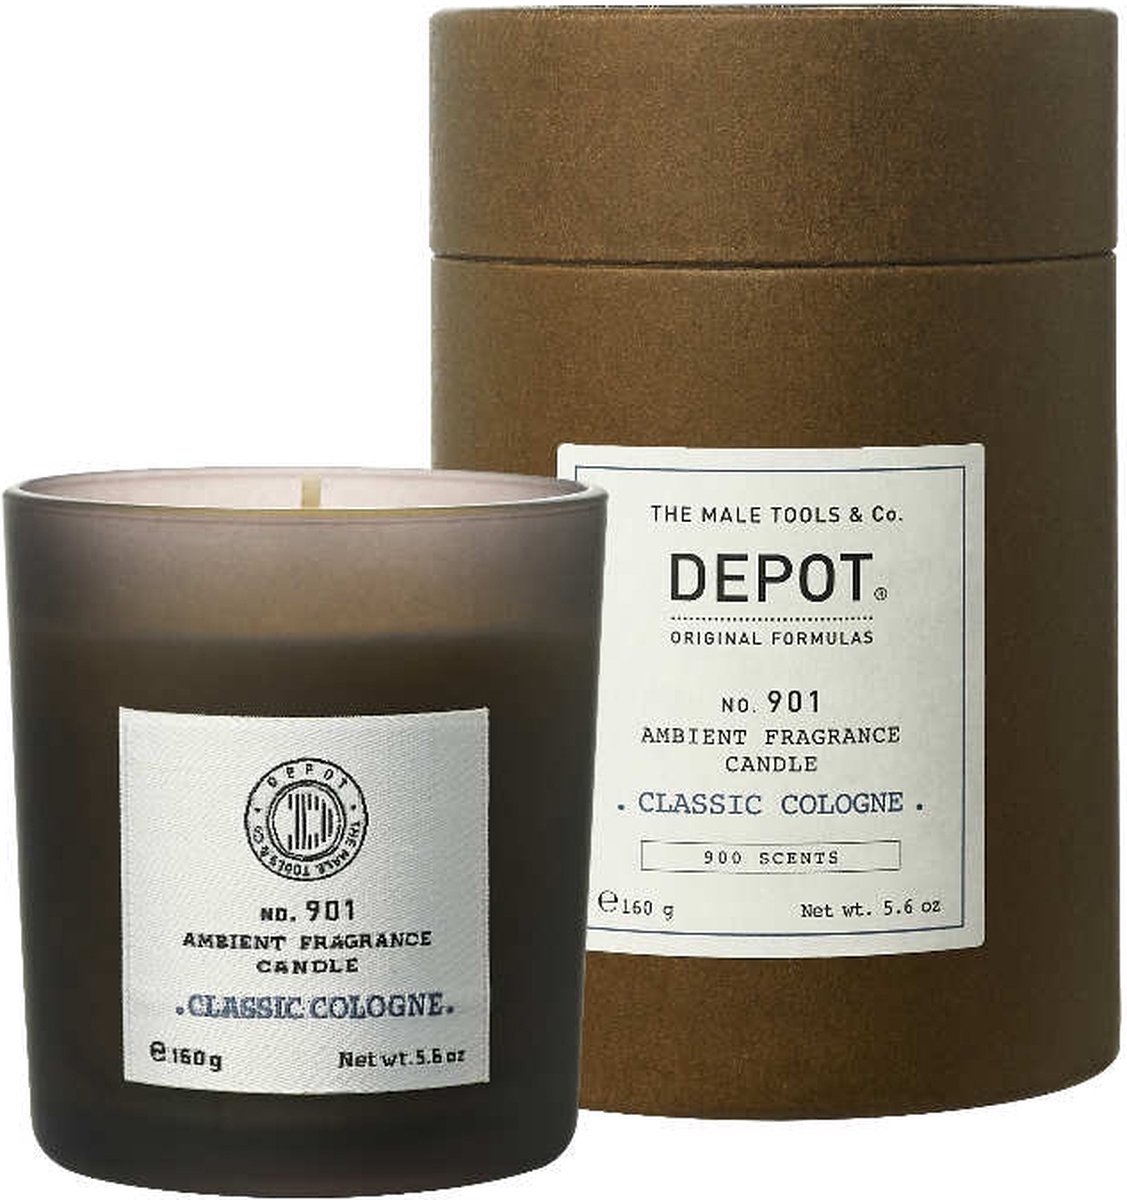 Depot 901 ambient fragrance candle classic cologne 160ml